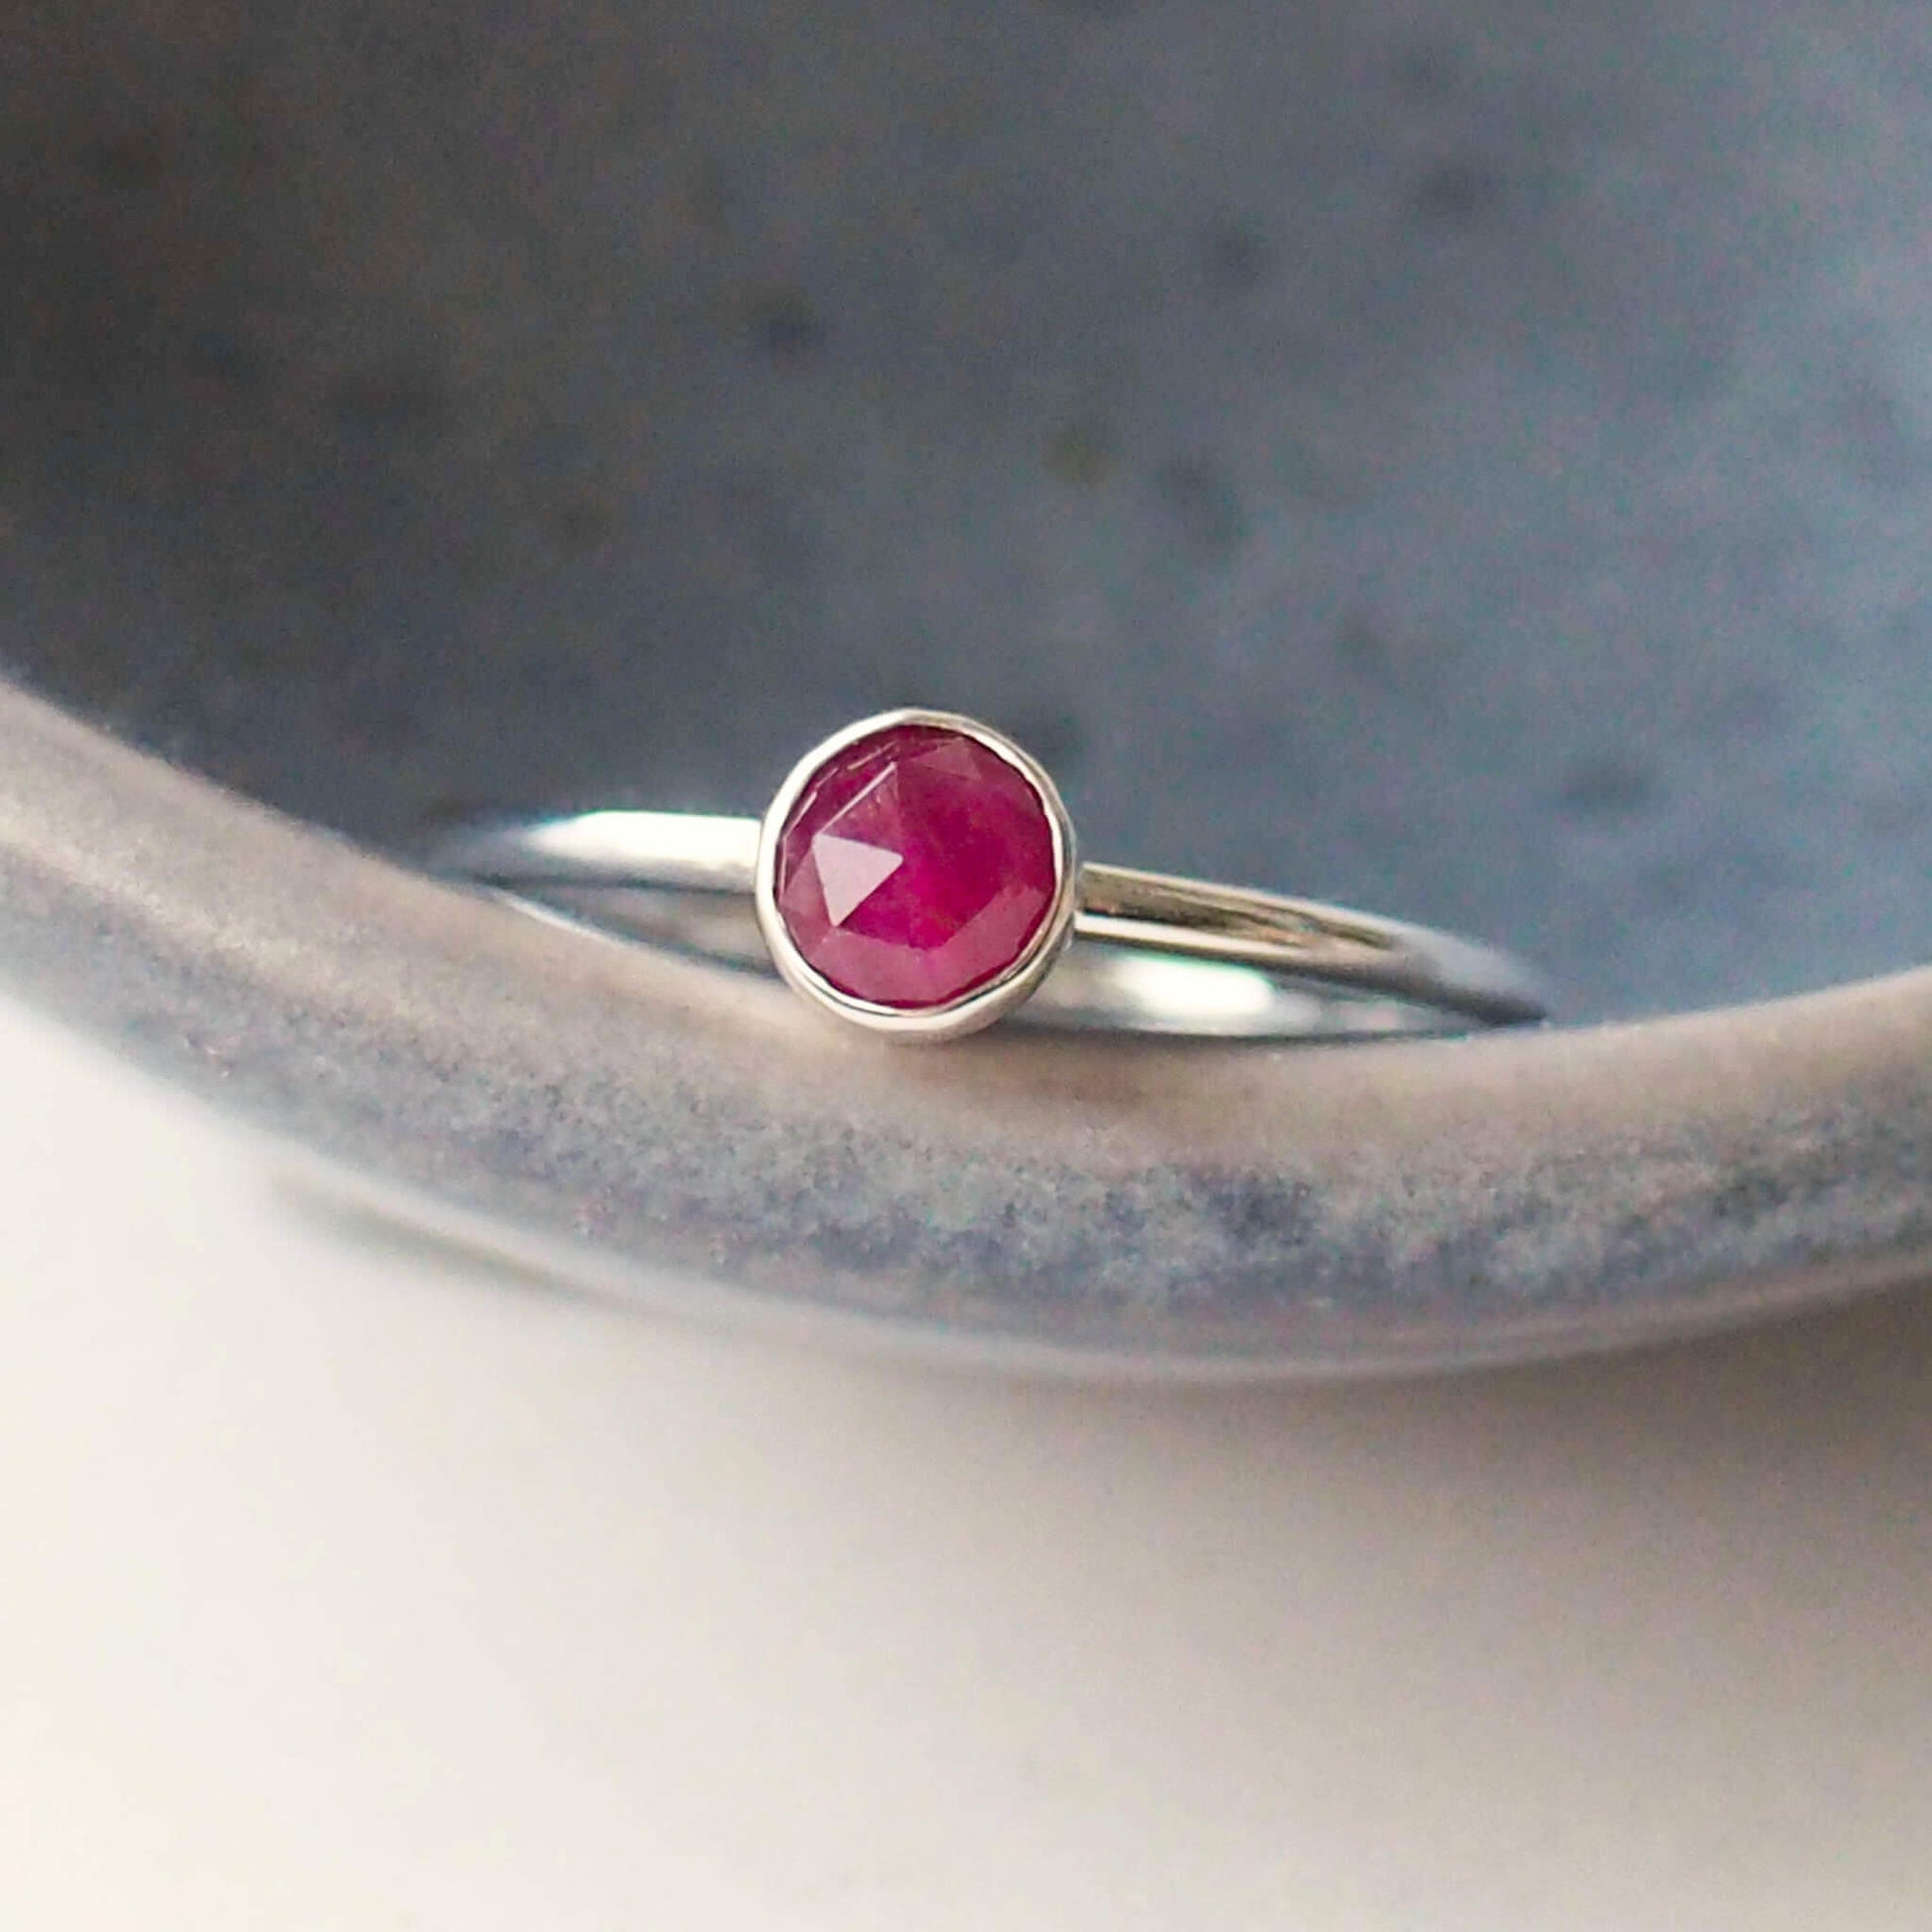 Red Ruby round gemstone ring in Sterling SIlver pictured against a grey background. The ring in minimalist in style with a round facet cut ruby in a 5mm size. Handmade by maram jewellery in Edinburgh UK